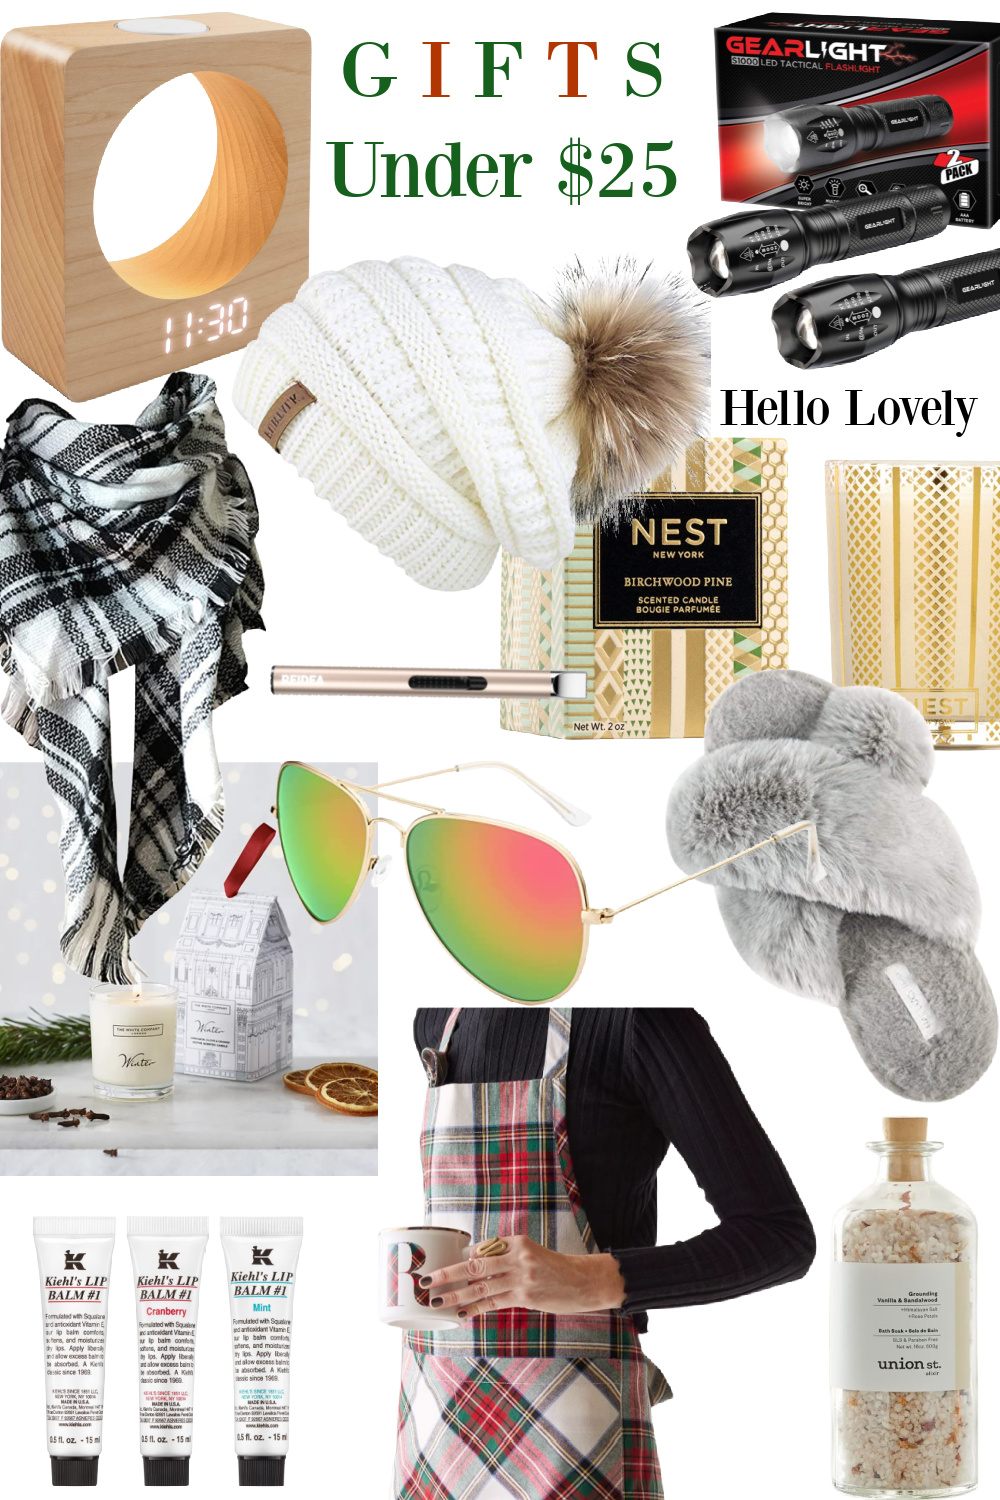 Gifts Under $25 from Hello Lovely - find something special at a friendly price for holiday gift and stocking stuffer shopping!